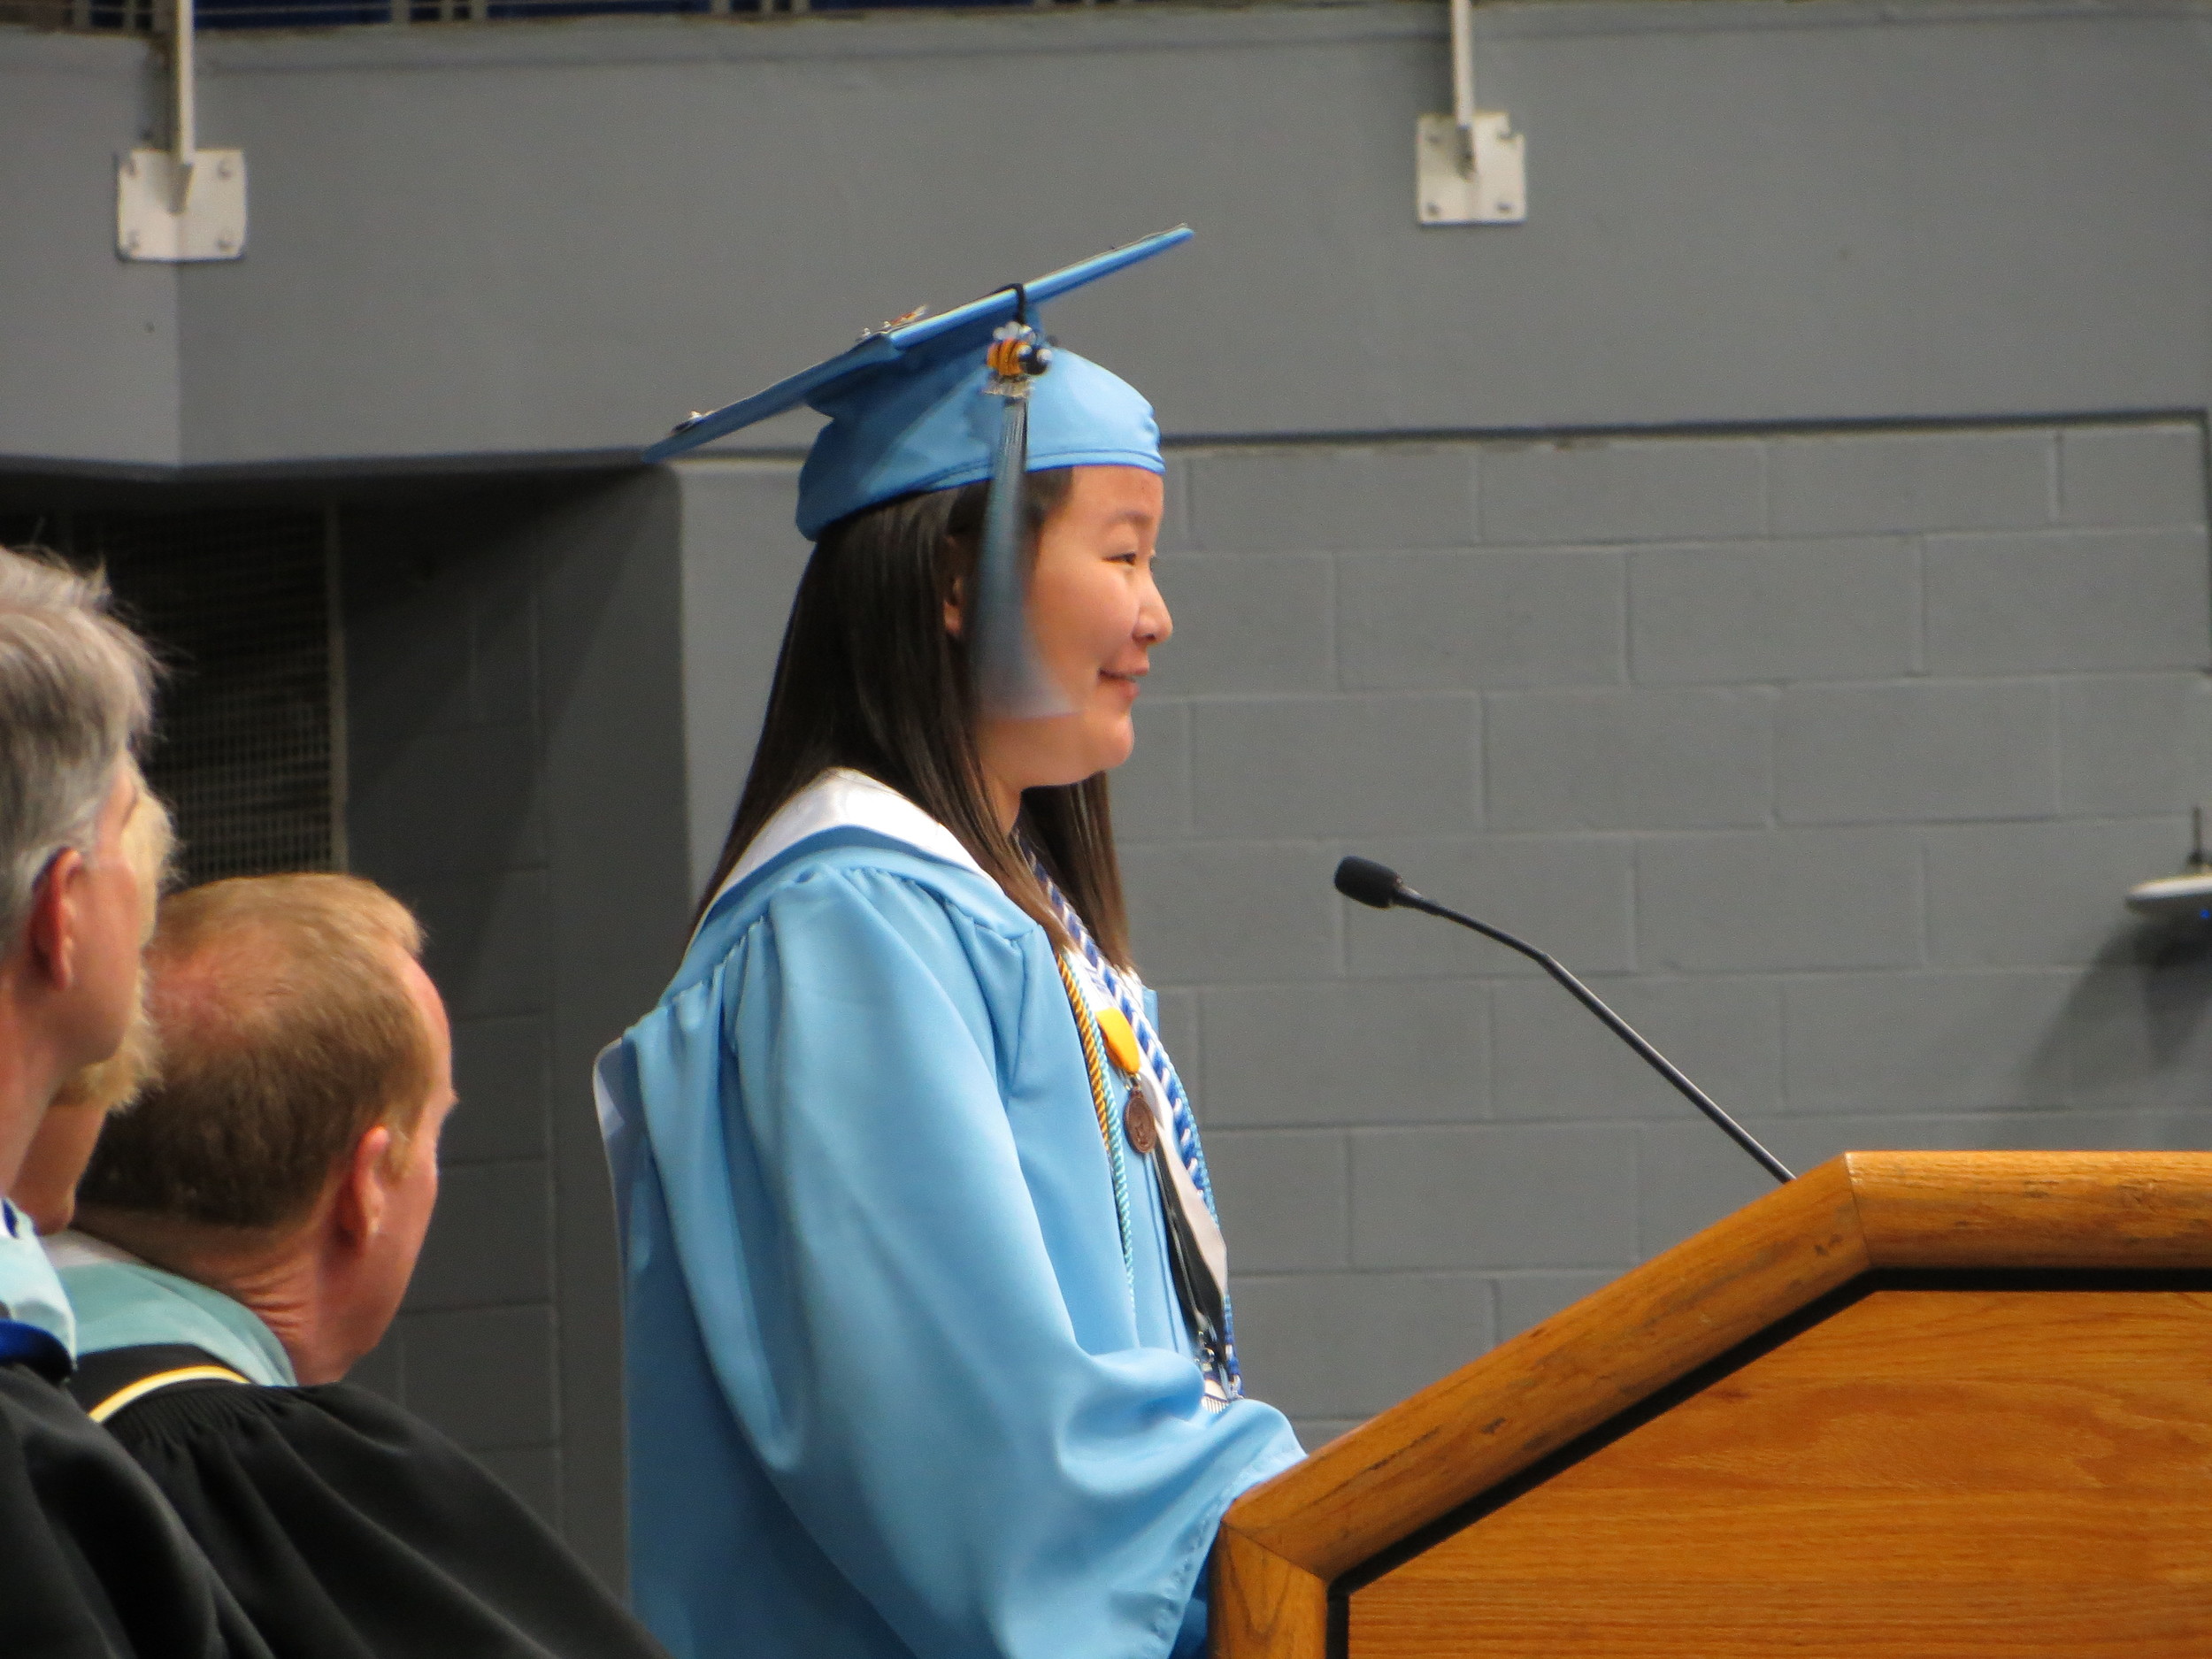 Valedictorian Yooree Ha addresses her class with thanks and well wishes.